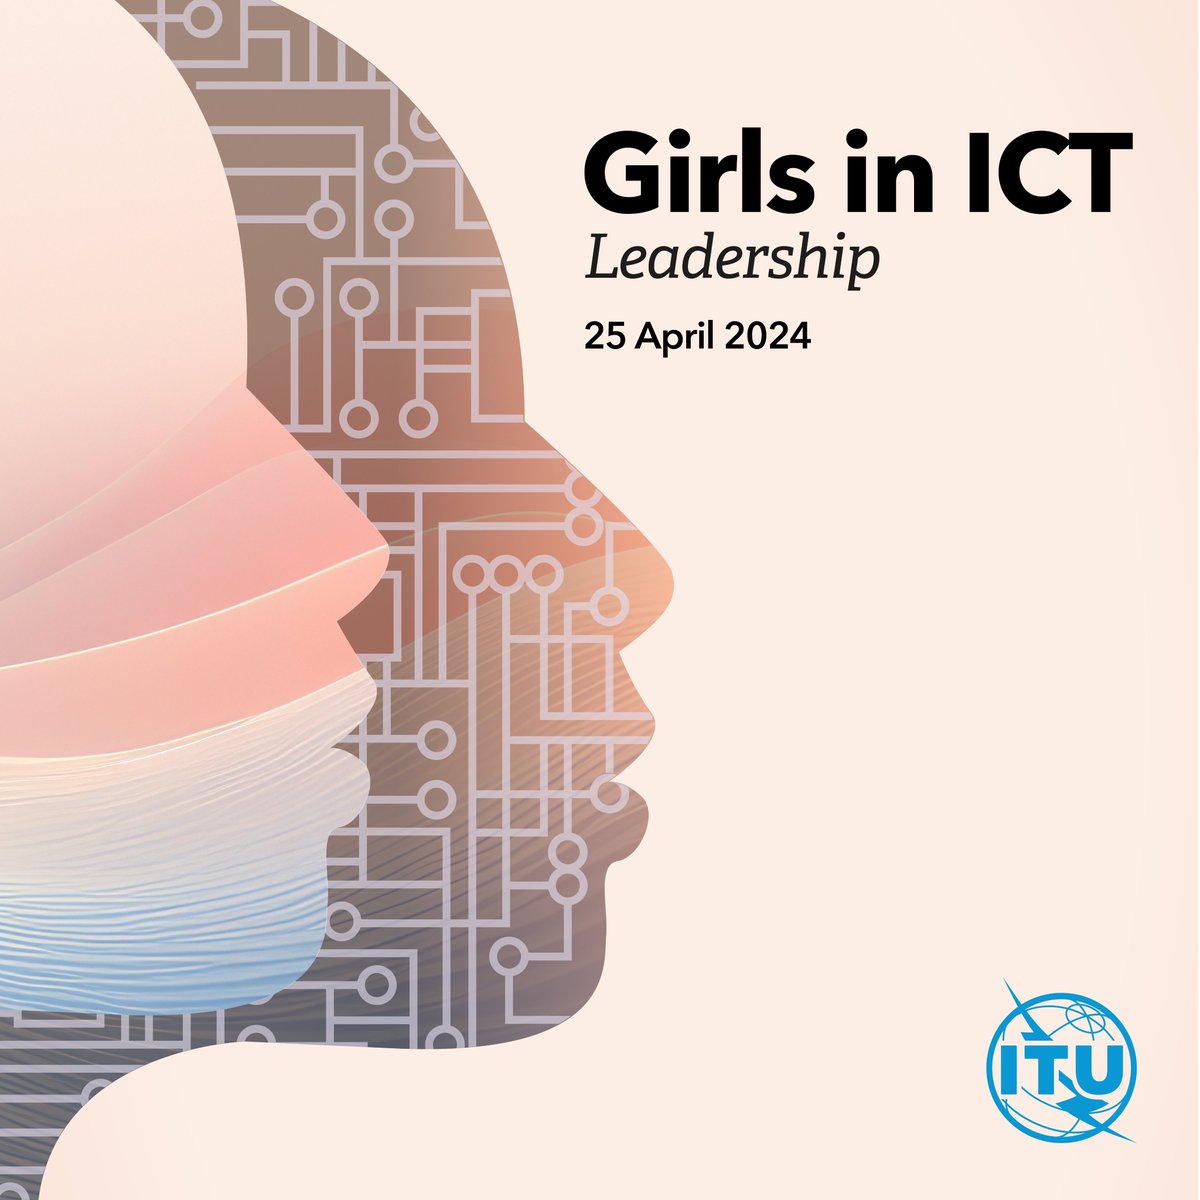 We’re celebrating #GirlsinICT Day👩‍💻 Women’s participation in ICT-related fields continues to be low. We need strong female role models in science, technology, engineering, and mathematics (STEM) careers. 👉itu.int/women-and-girl… @ITU